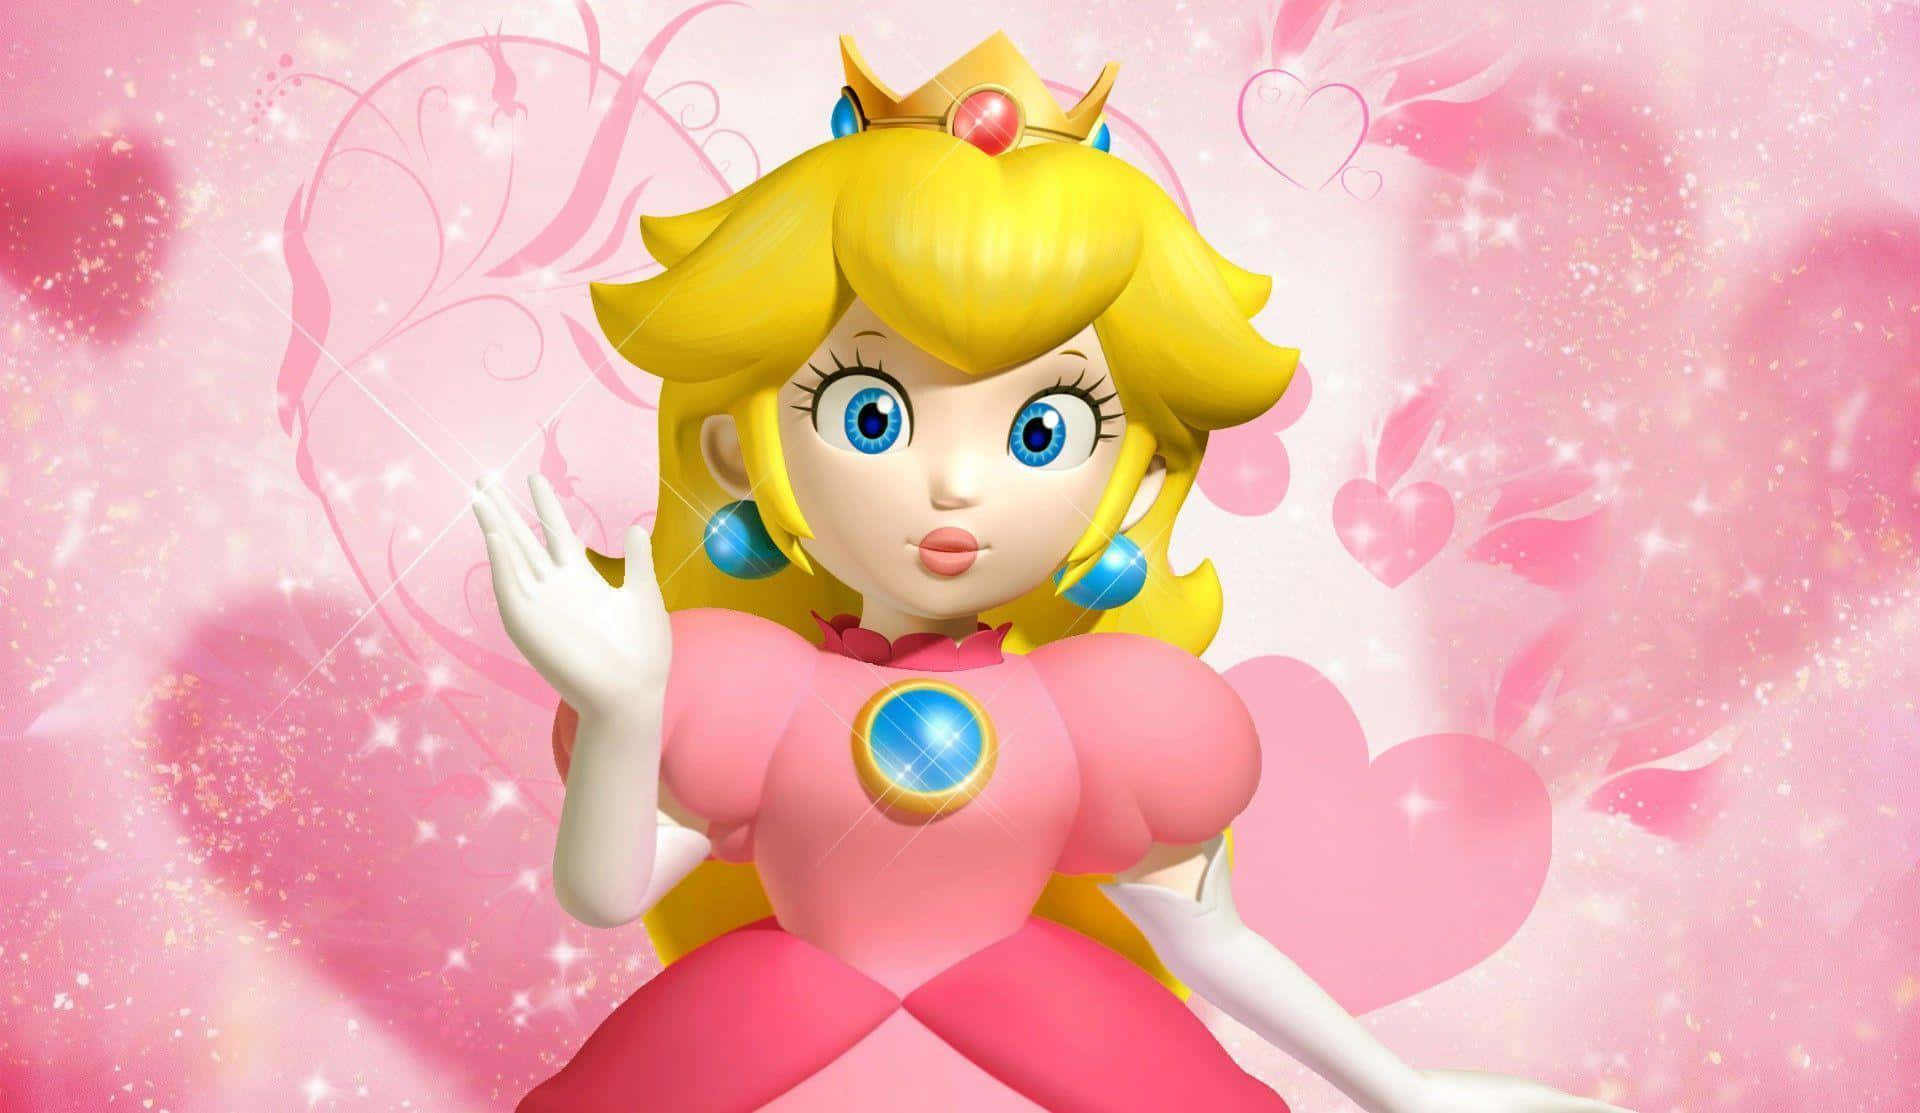 "Princess Peach shows her crowning beauty in this charming portrait" Wallpaper